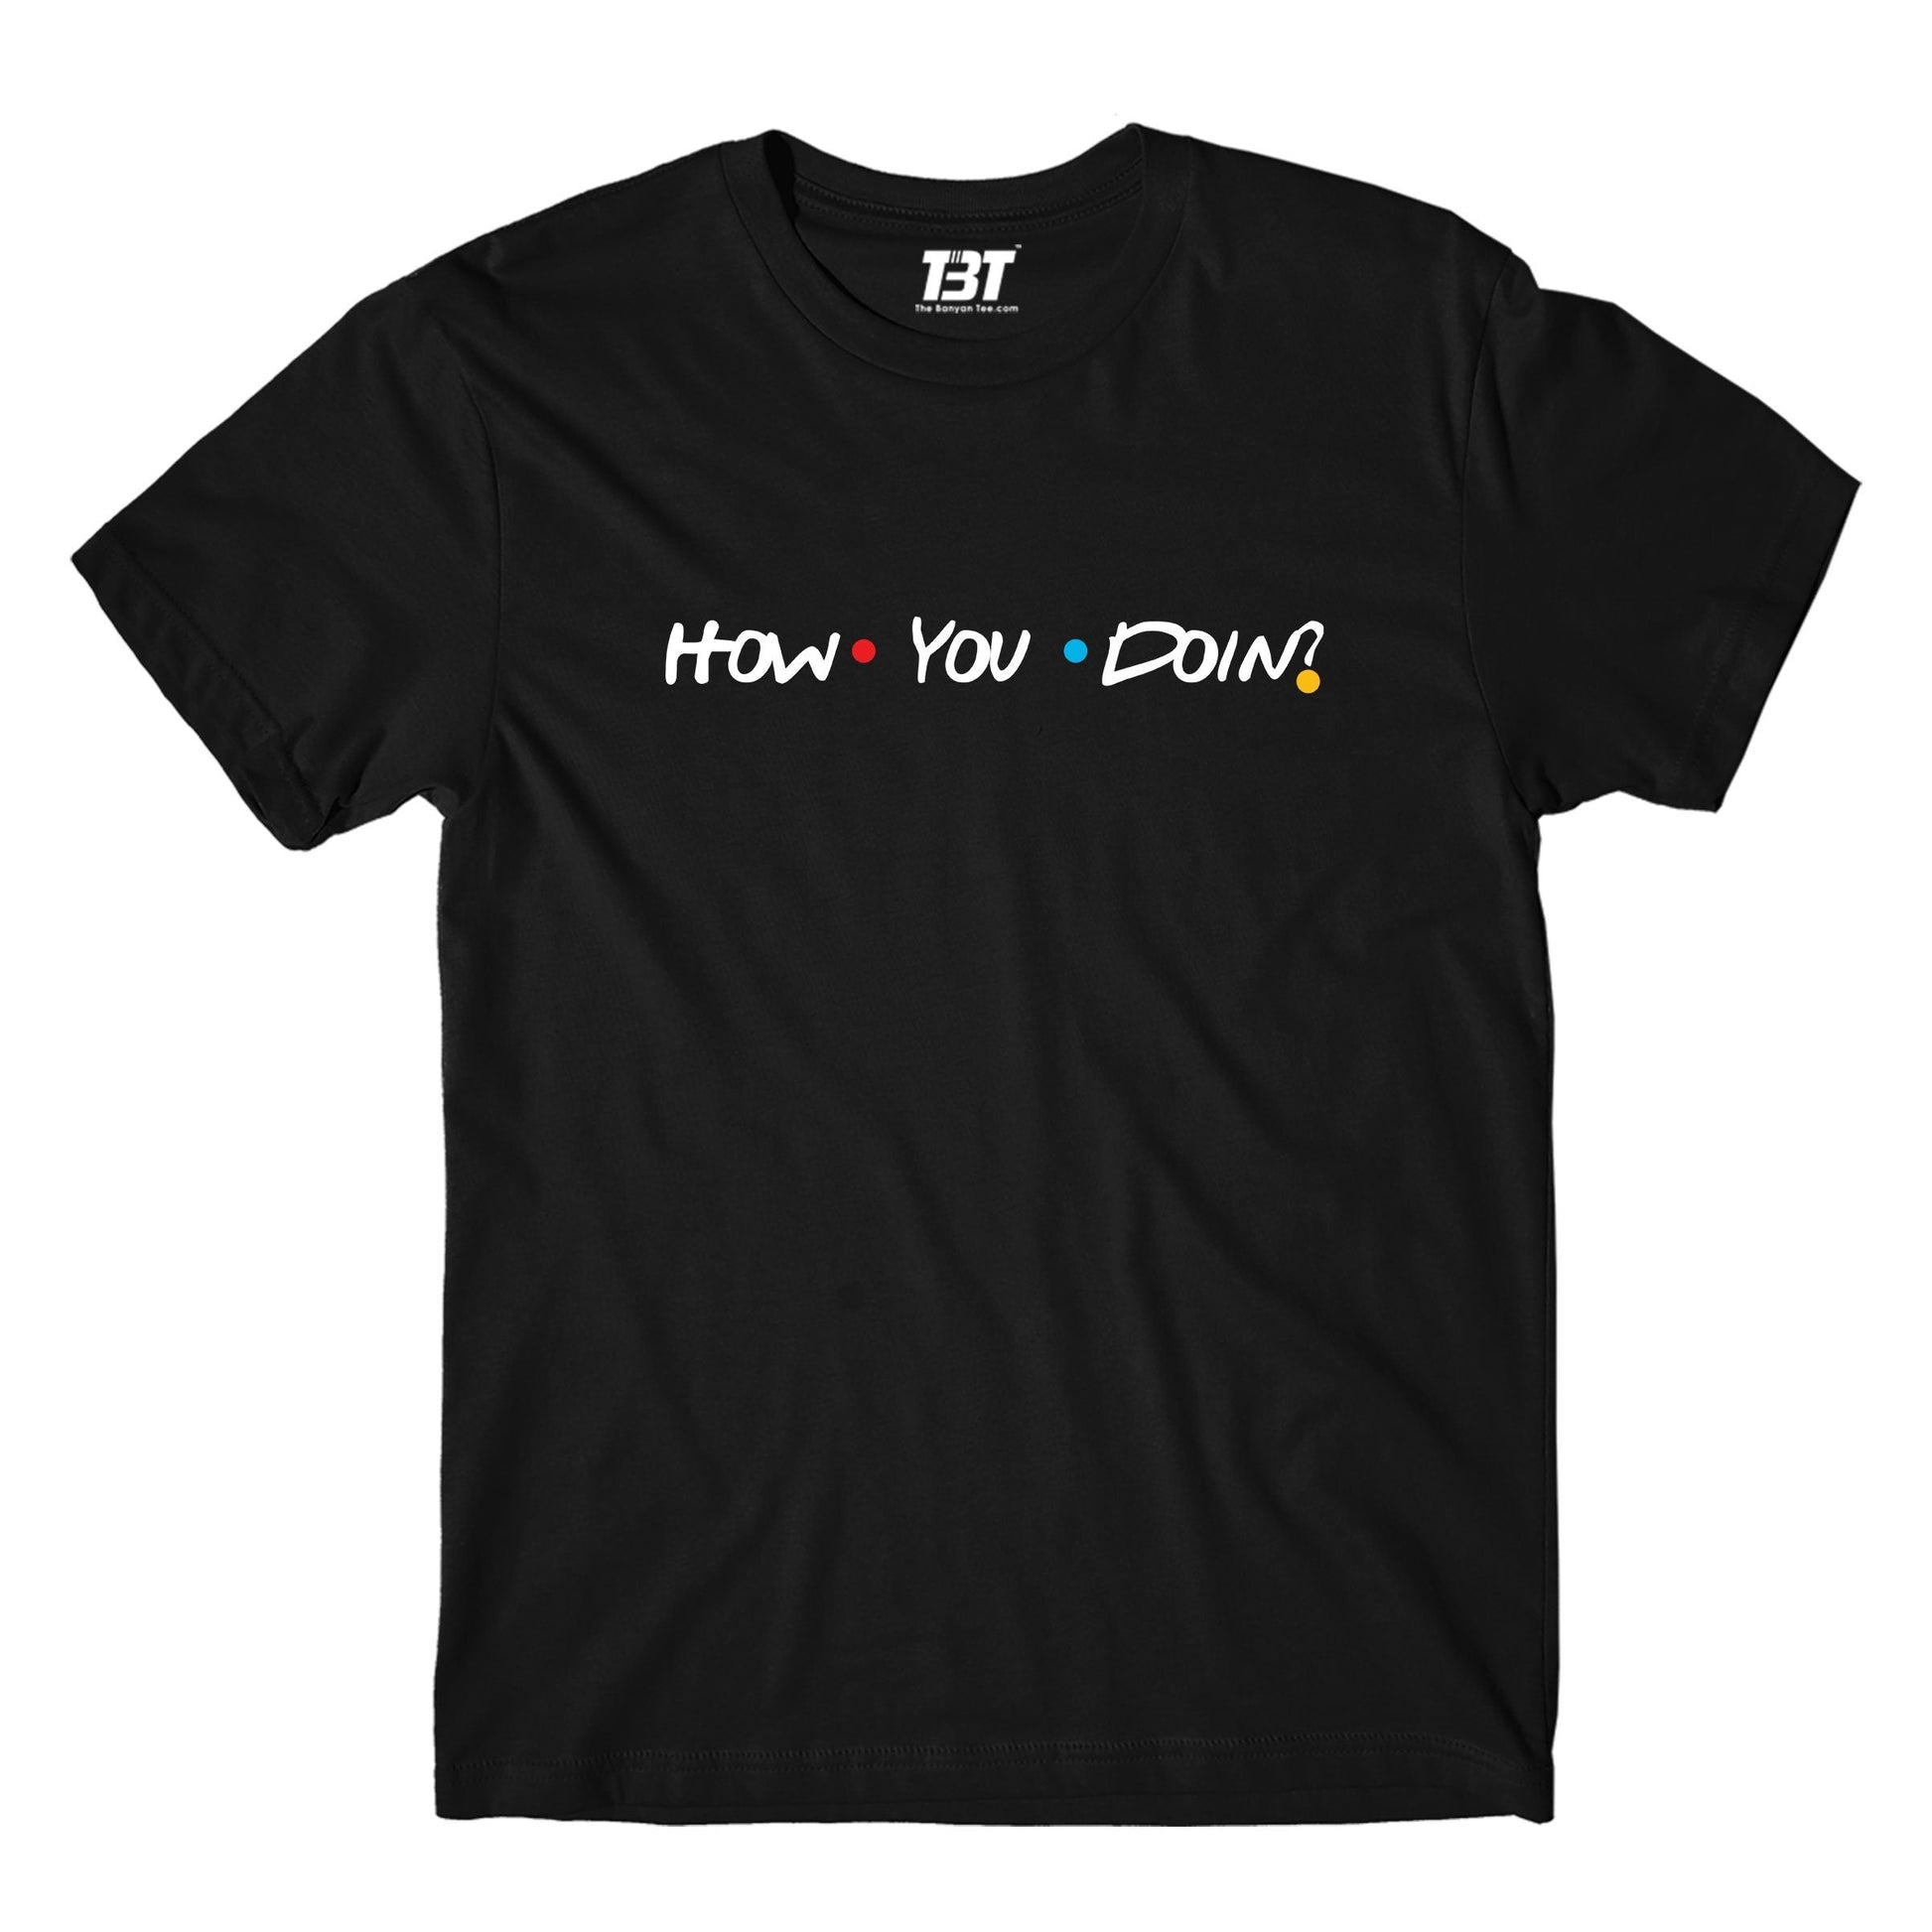 Friends T-shirt - How You Doin? by The Banyan Tee TBT